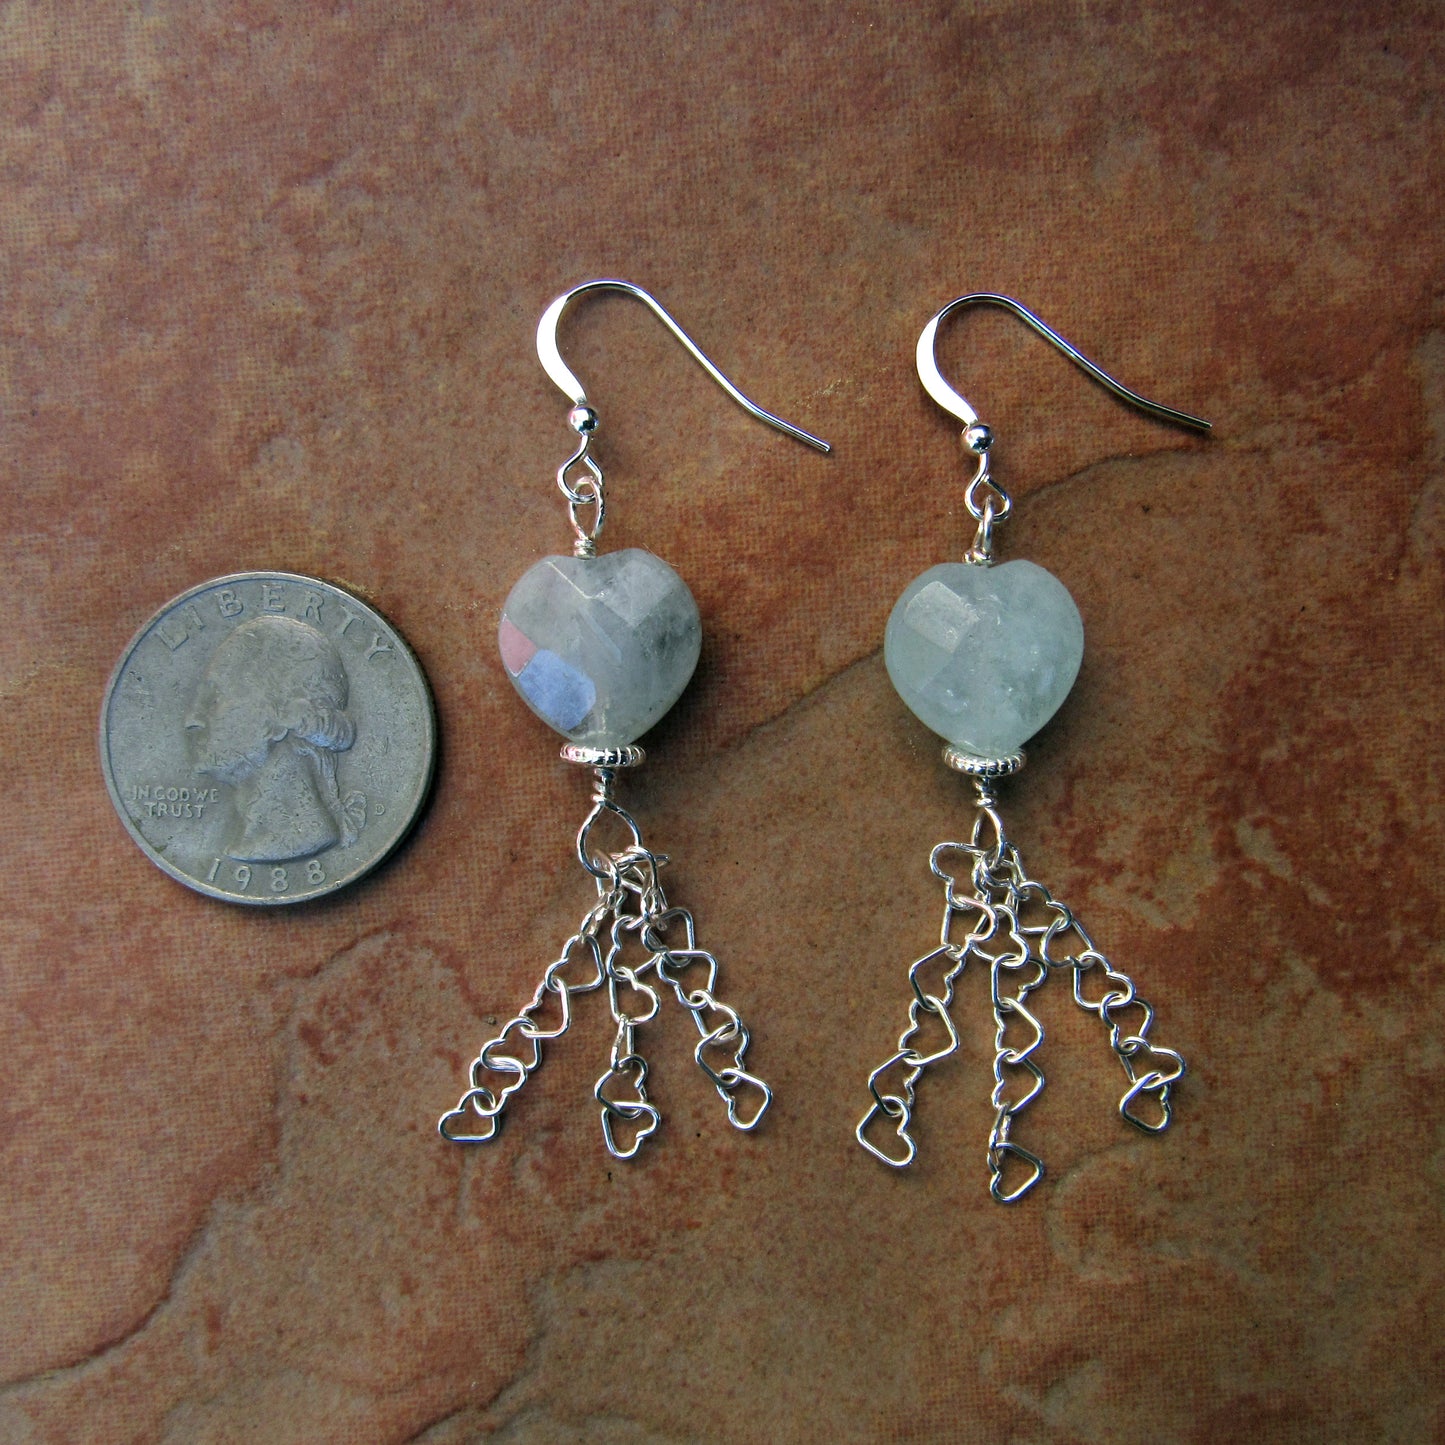 Aquamarine Gemstone Hearts with Sterling Silver Heart Chain Drop Earrings